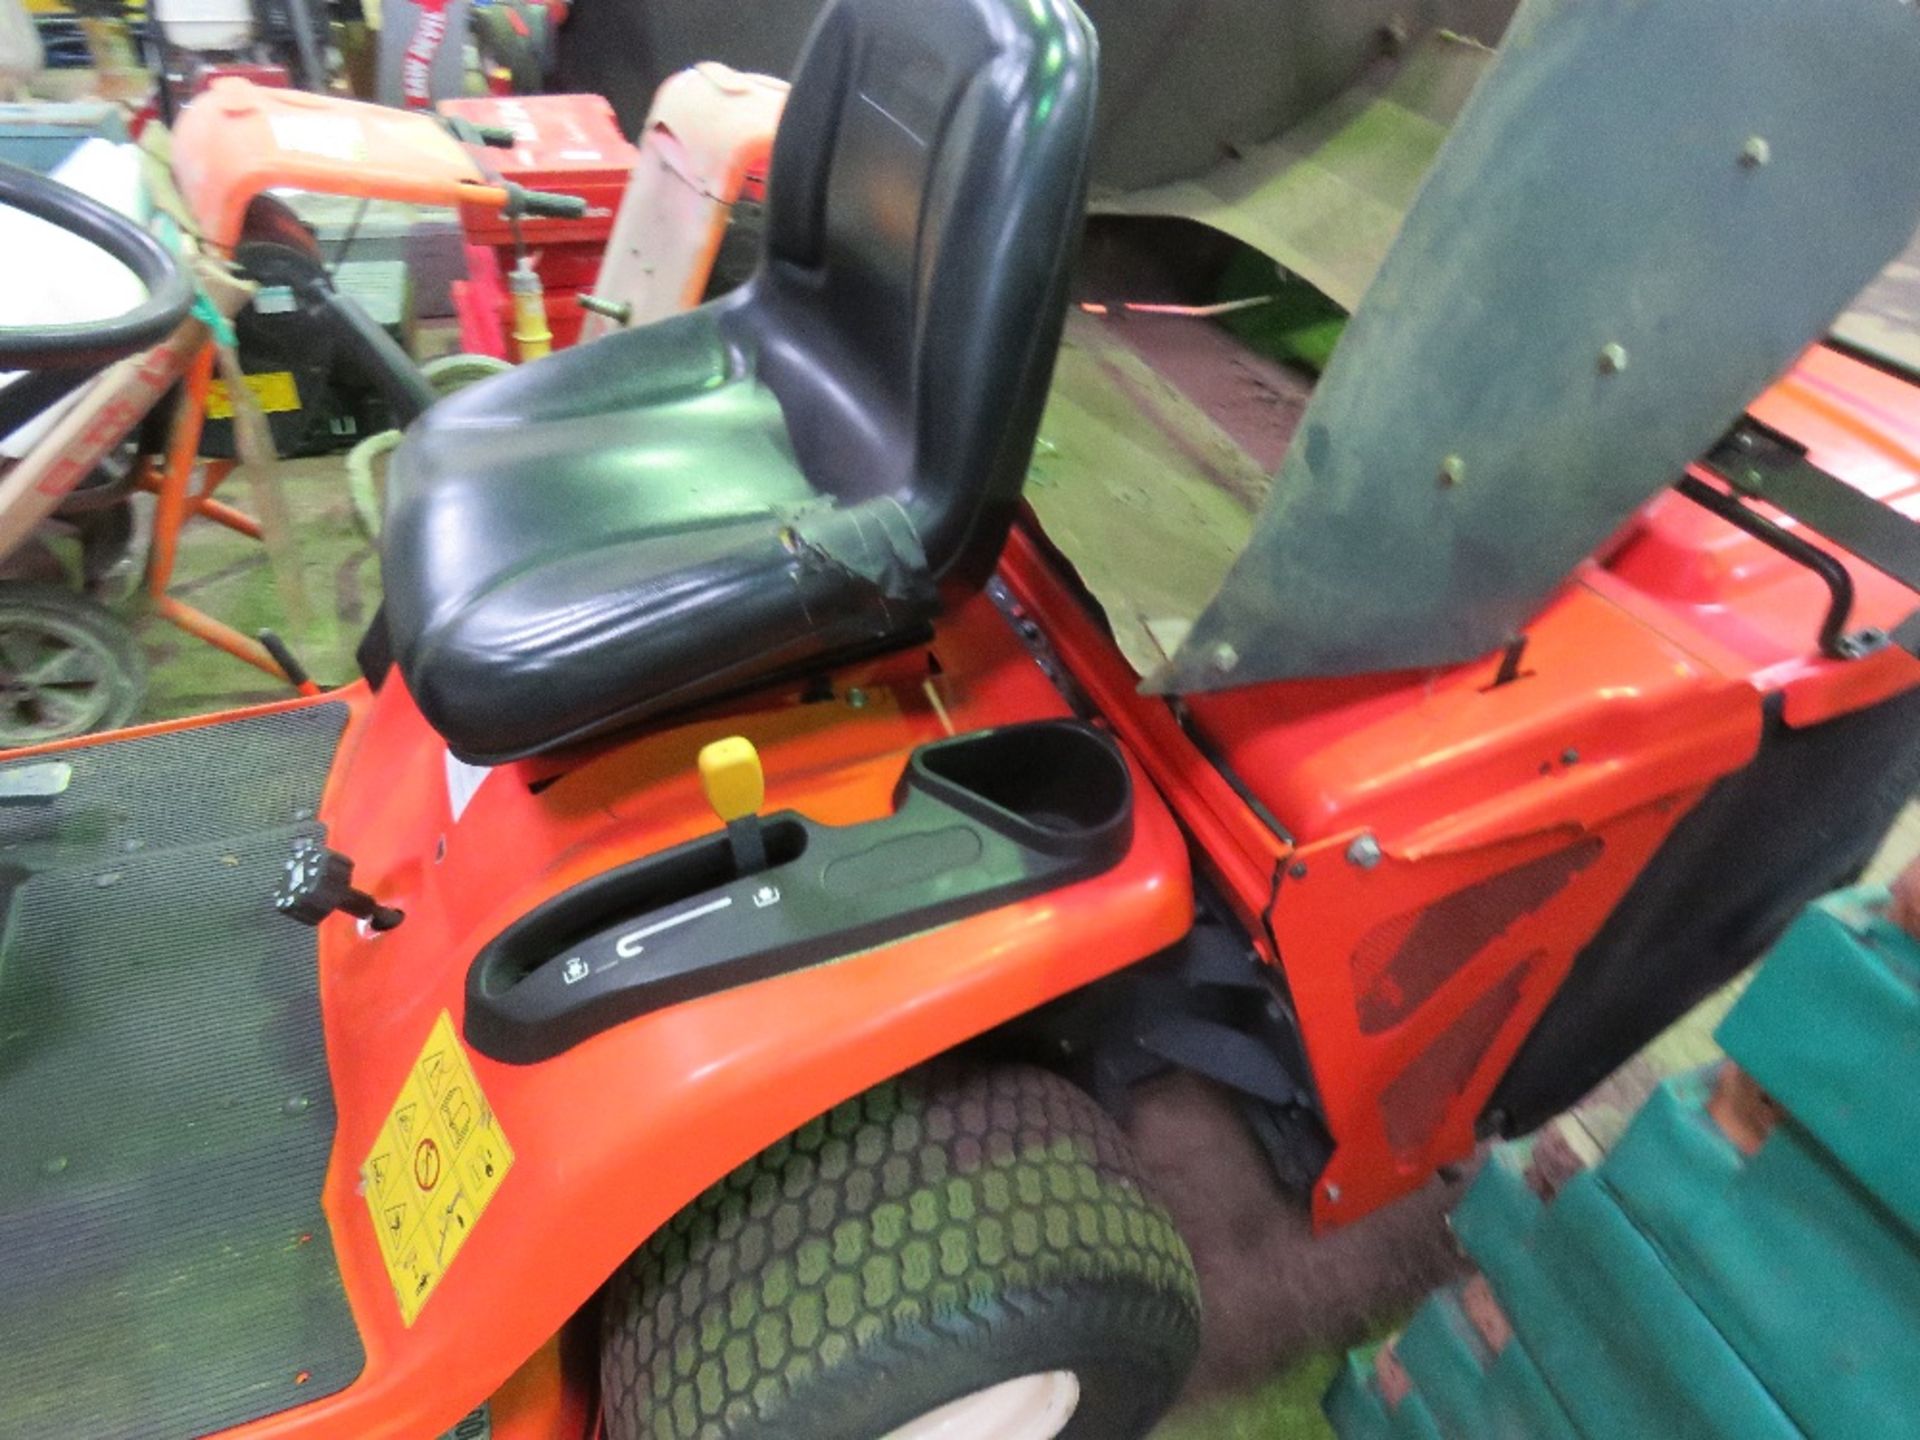 KUBOTA GR1600-II DIESEL RIDE ON MOWER WITH REAR COLLECTOR PLUS DISCHARGE CHUTE. SN:30142. WHEN TESTE - Image 2 of 9